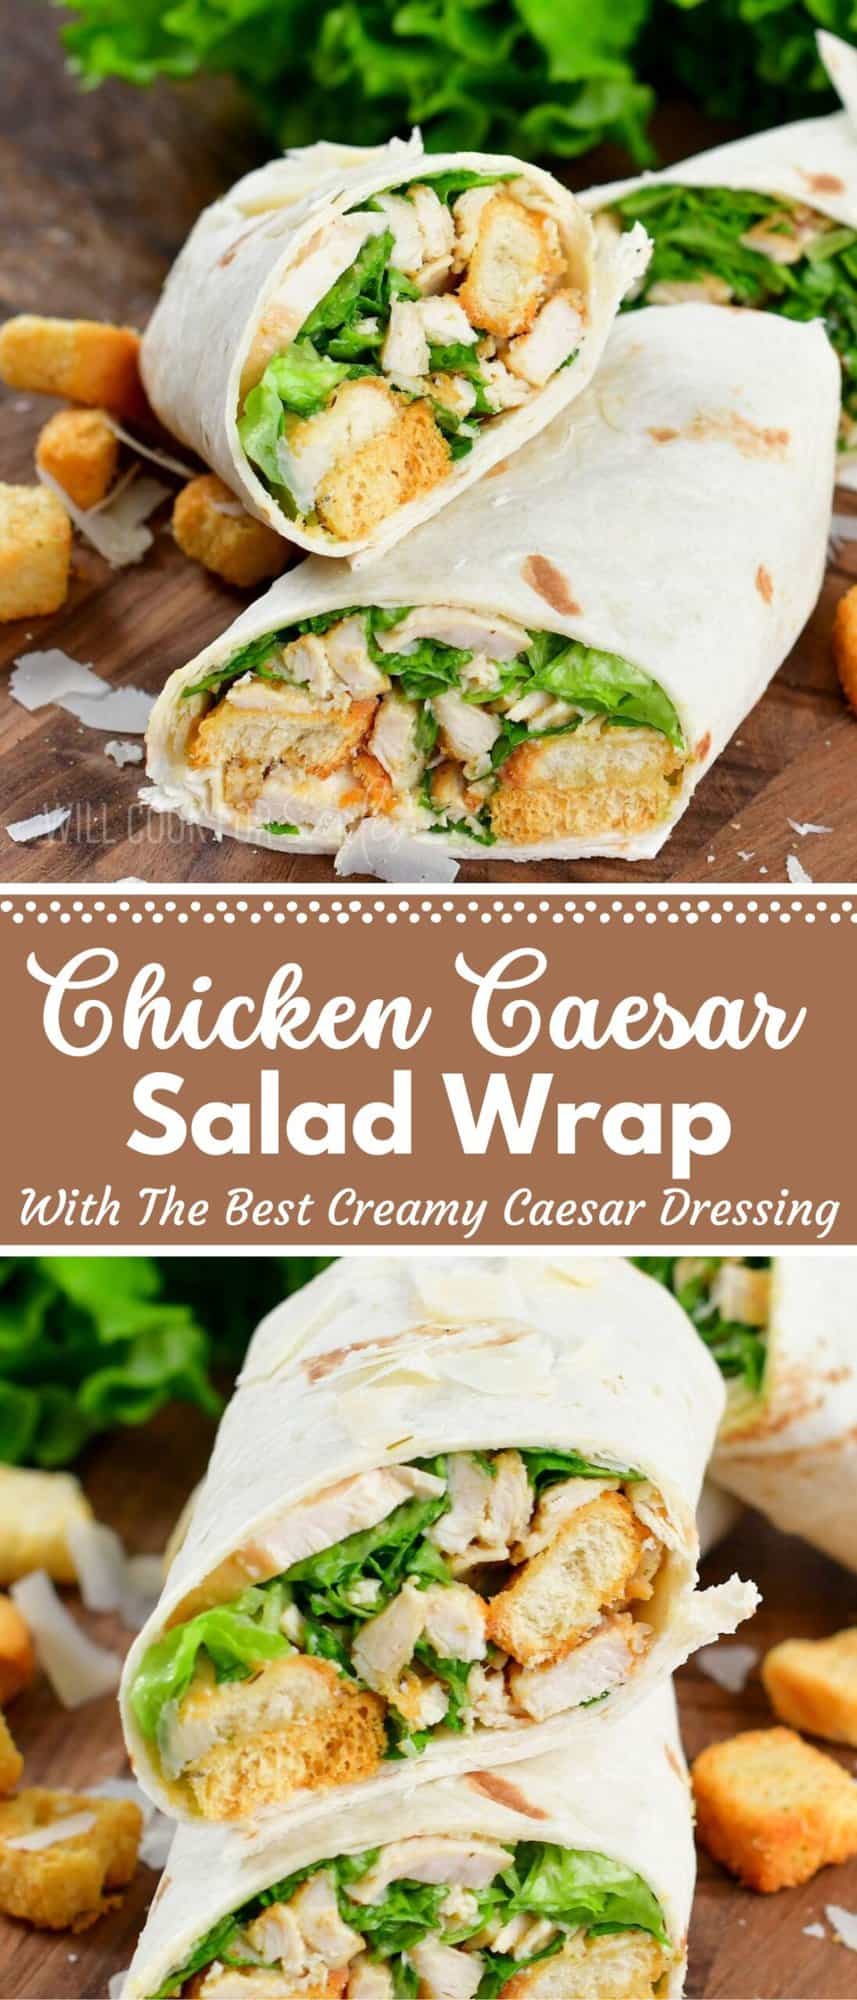 collage of two chicken wrap photos and title in the middle.